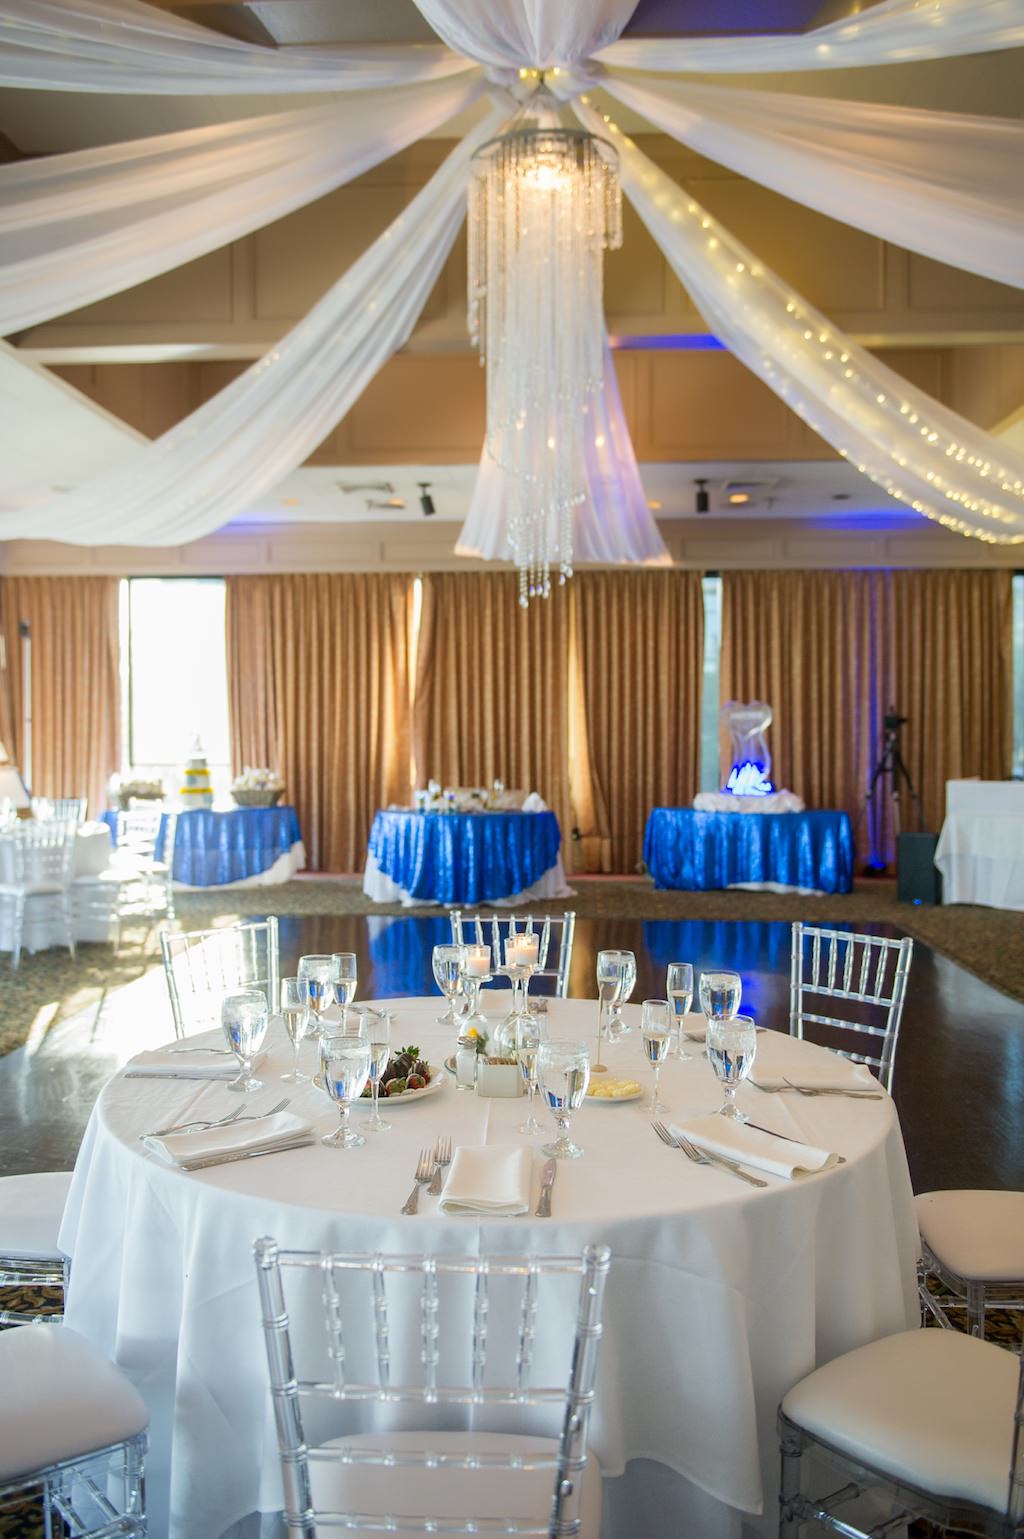 Ballroom Wedding Reception Decor, Round Tables, White and Blue Tablecloths, Clear Acrylic Chiavari Chairs, Crystal Chandelier, Draping and String Lights | Tampa Bay Photographer Andi Diamond Photography | Tampa Venue Rusty Pelican